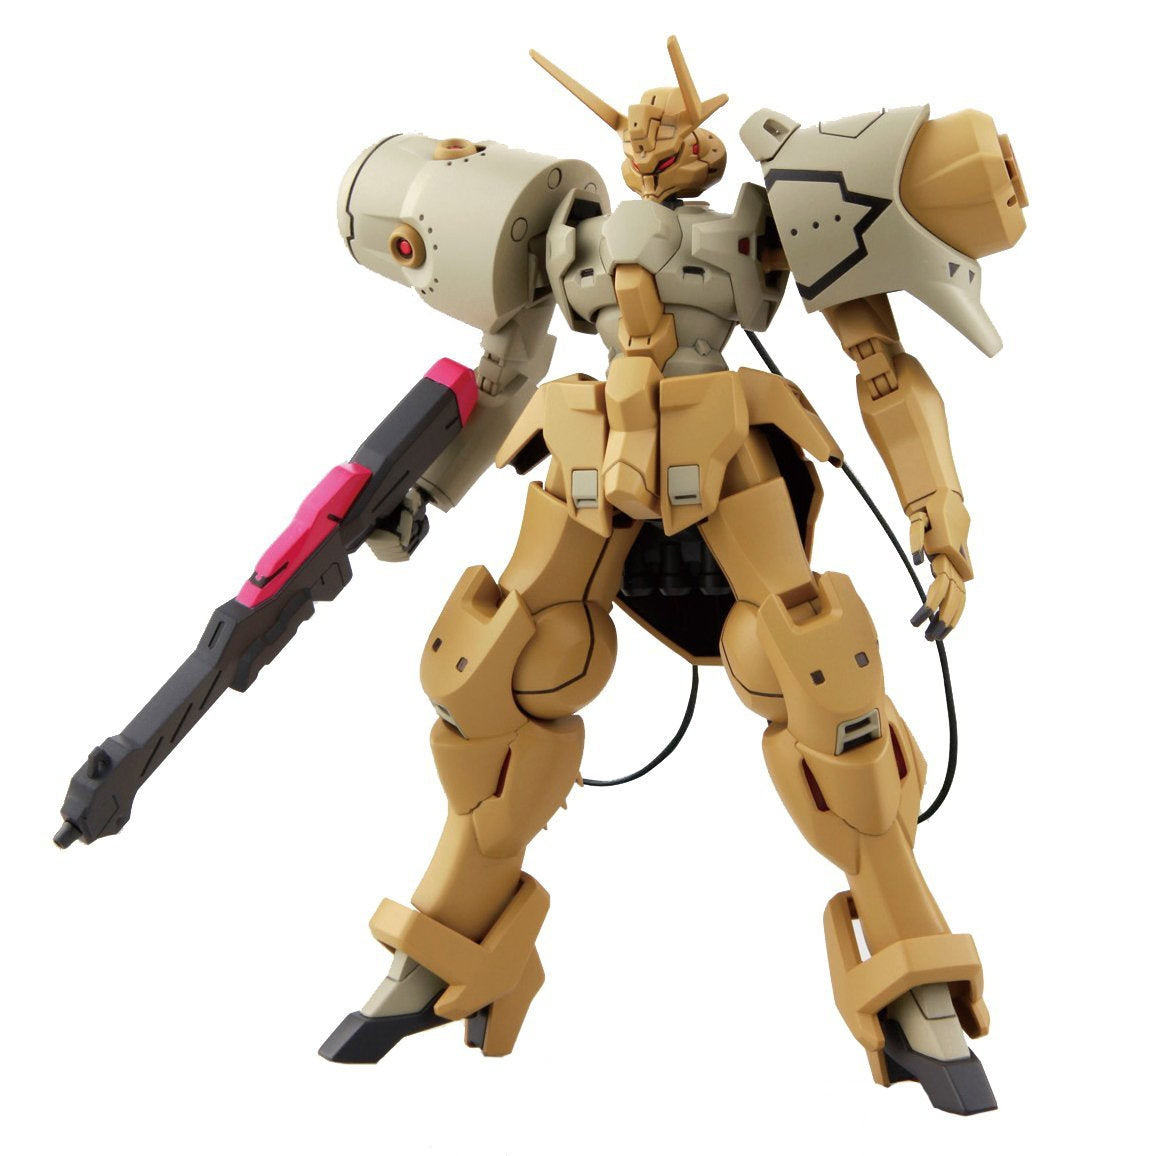 Image of HG G-Recox Gastima Gundam Reconguista in G Action Figure (1/144 Scale)